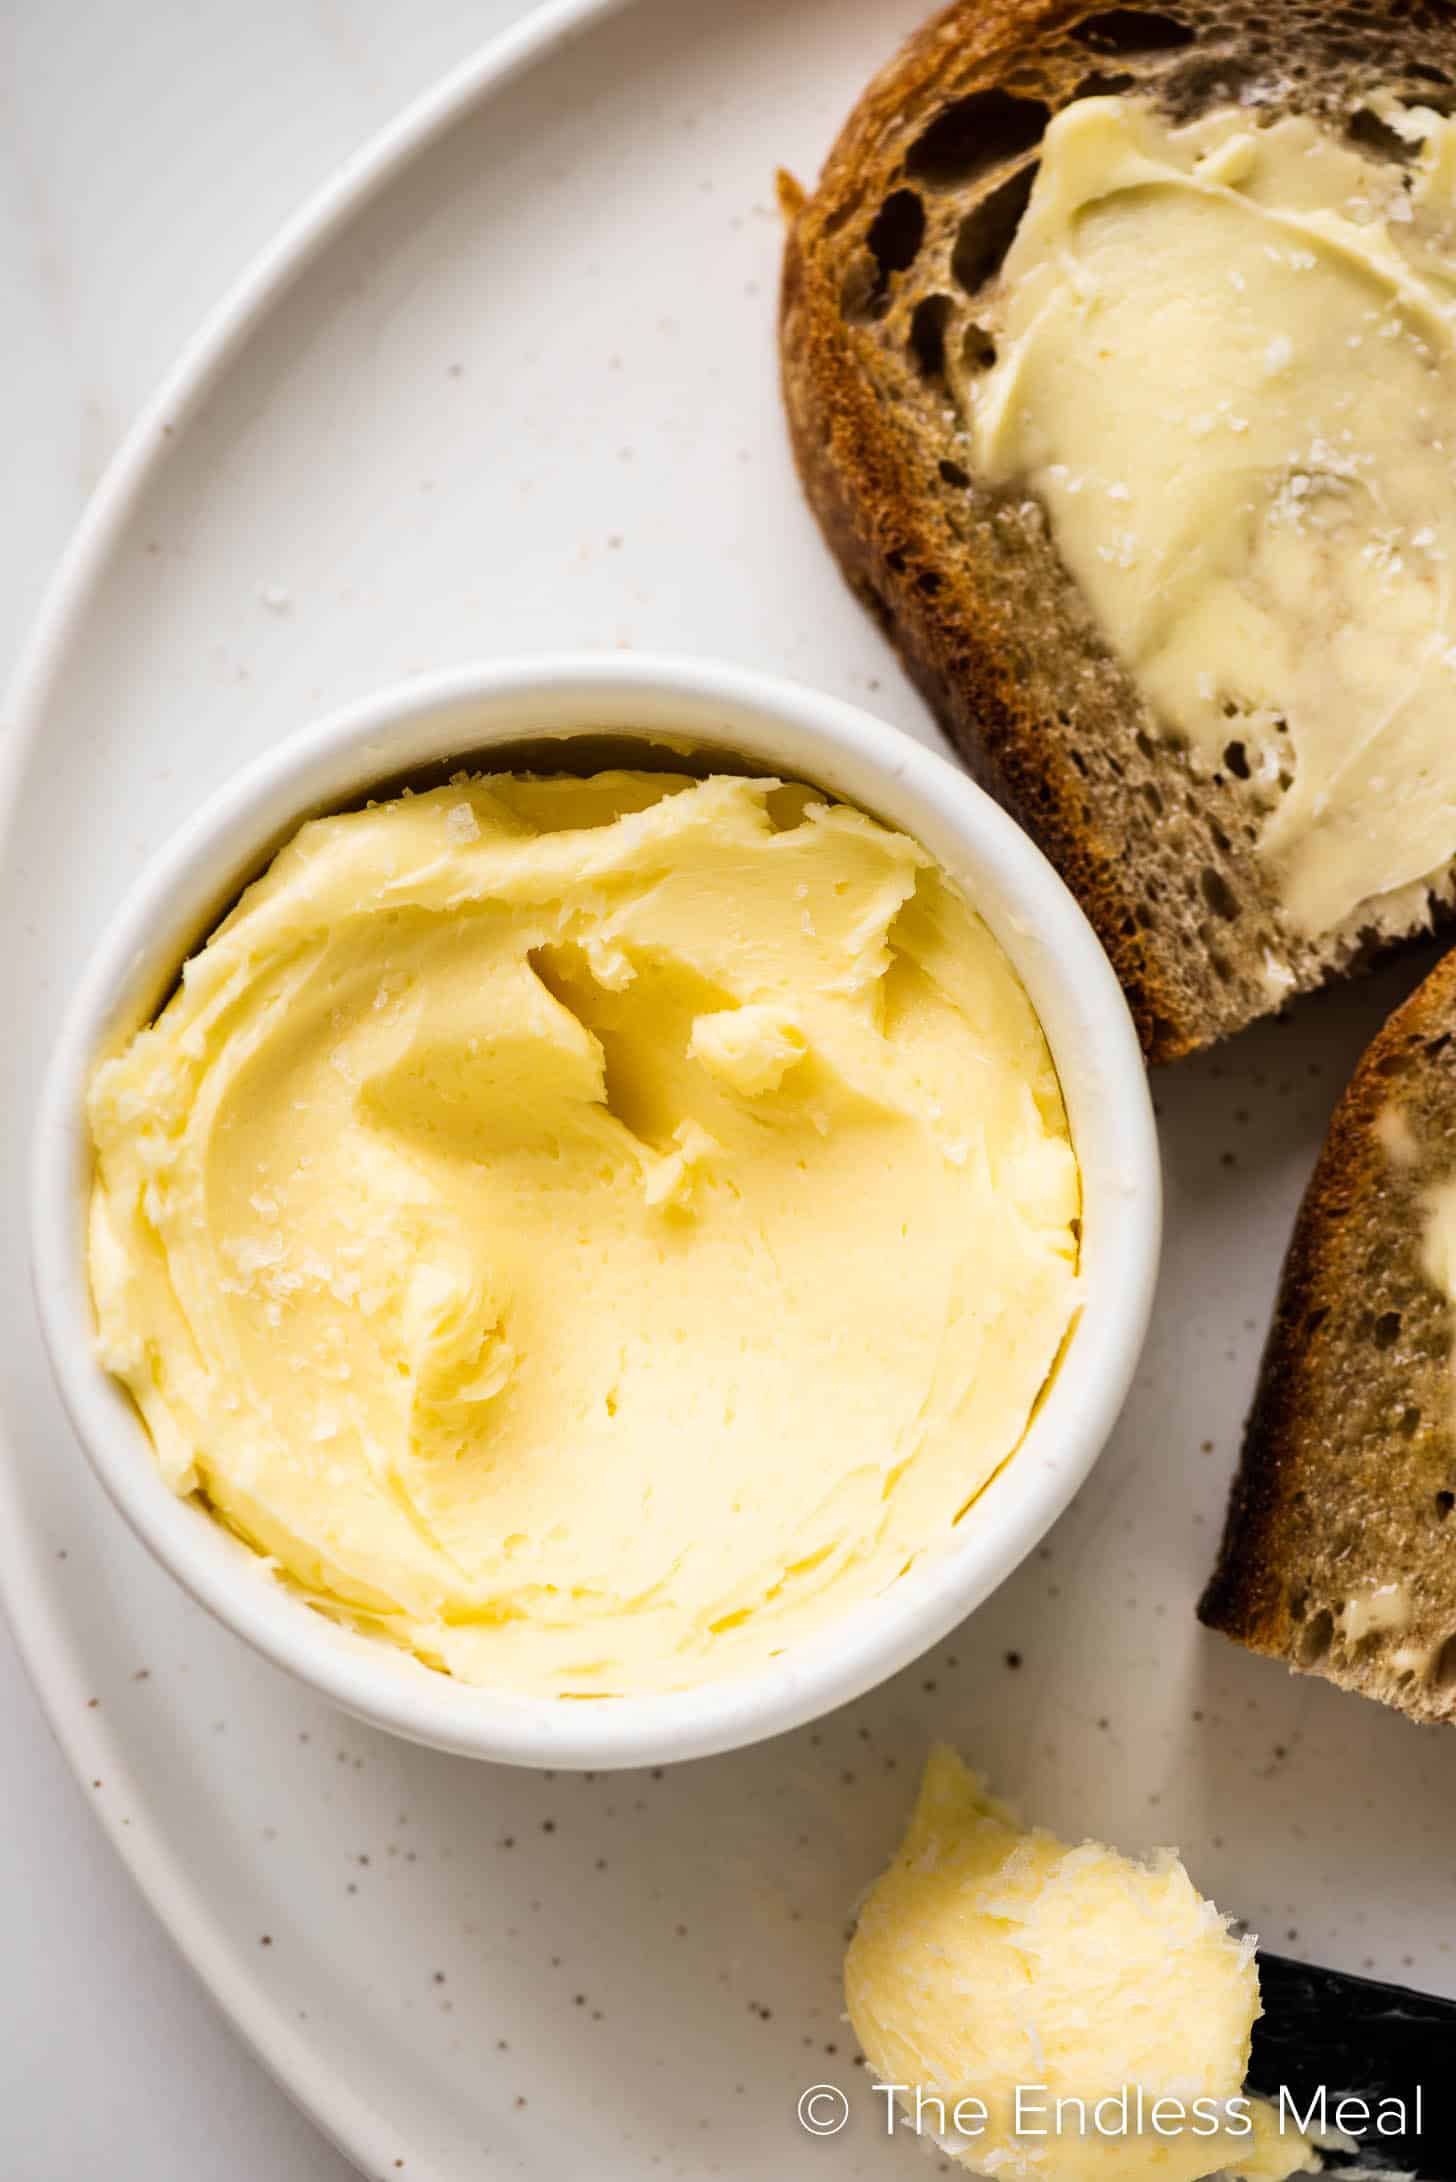 a close up of Homemade Butter next to a plate of buttered toast